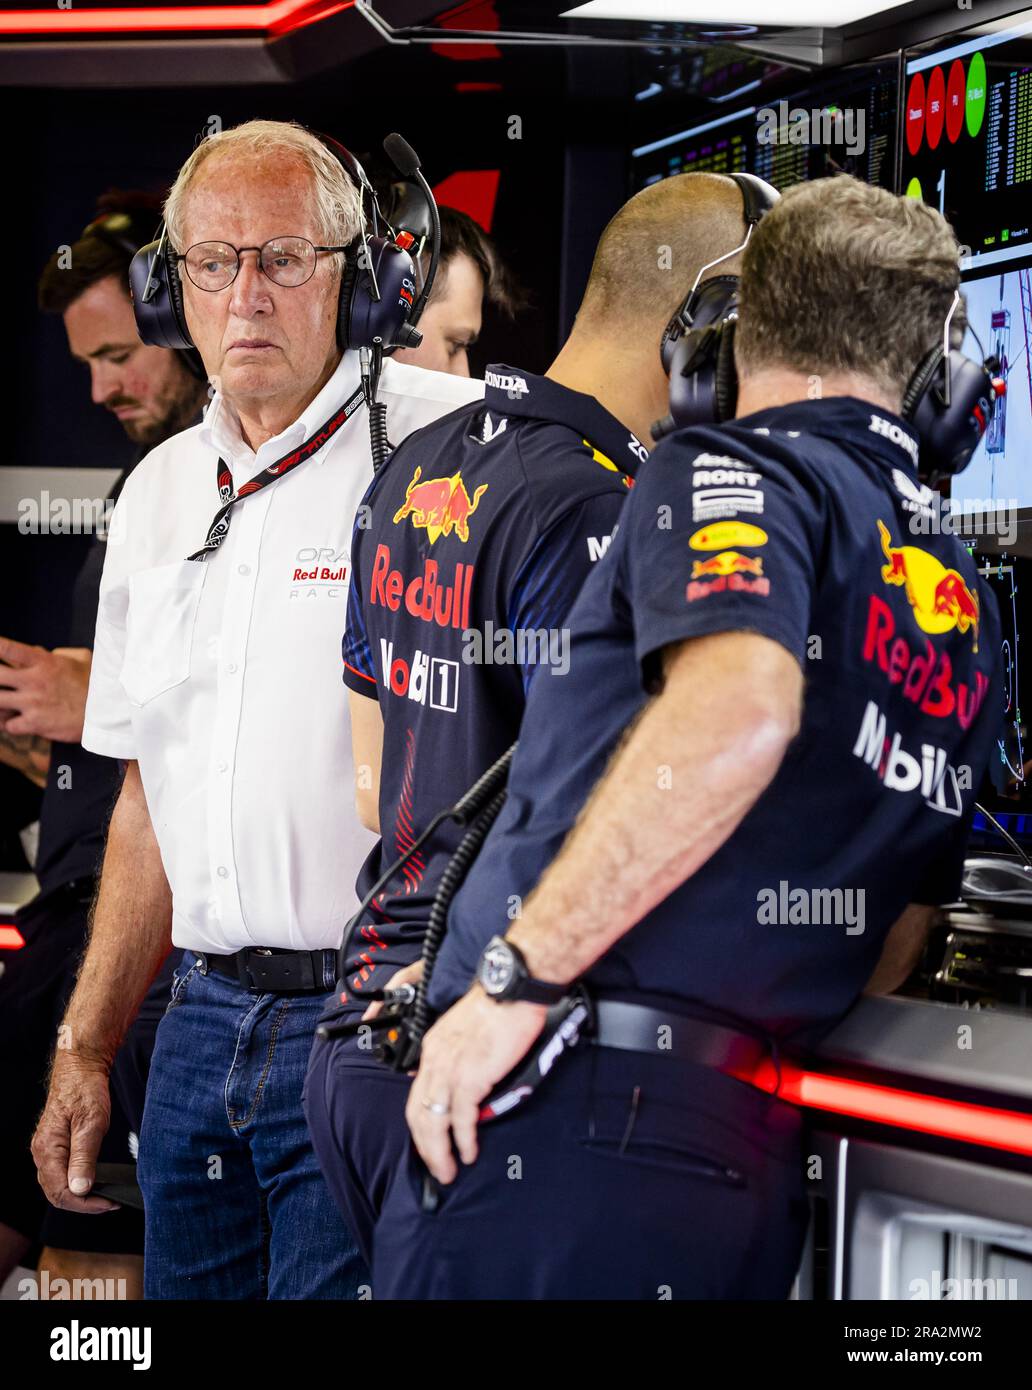 SPIELBERG - Helmut Marko (Red Bull Racing) during the first free practice session ahead of the Austrian Grand Prix at the Red Bull Ring on June 30, 2023 in Spielberg, Austria. ANP SEM VAN DER WAL netherlands out - belgium out Stock Photo